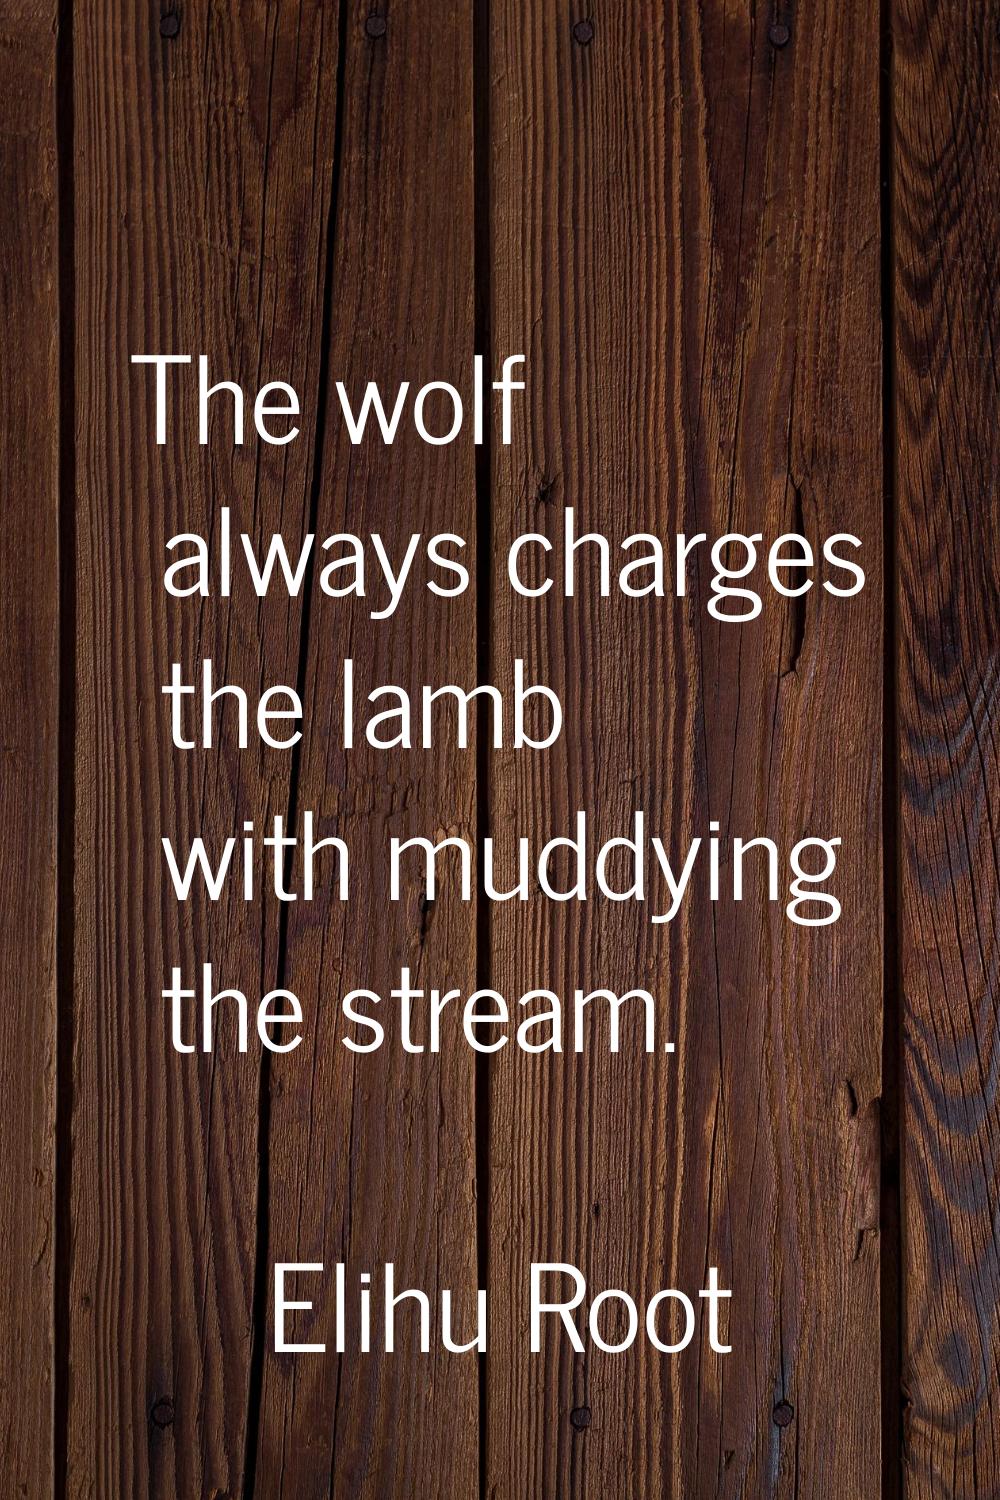 The wolf always charges the lamb with muddying the stream.